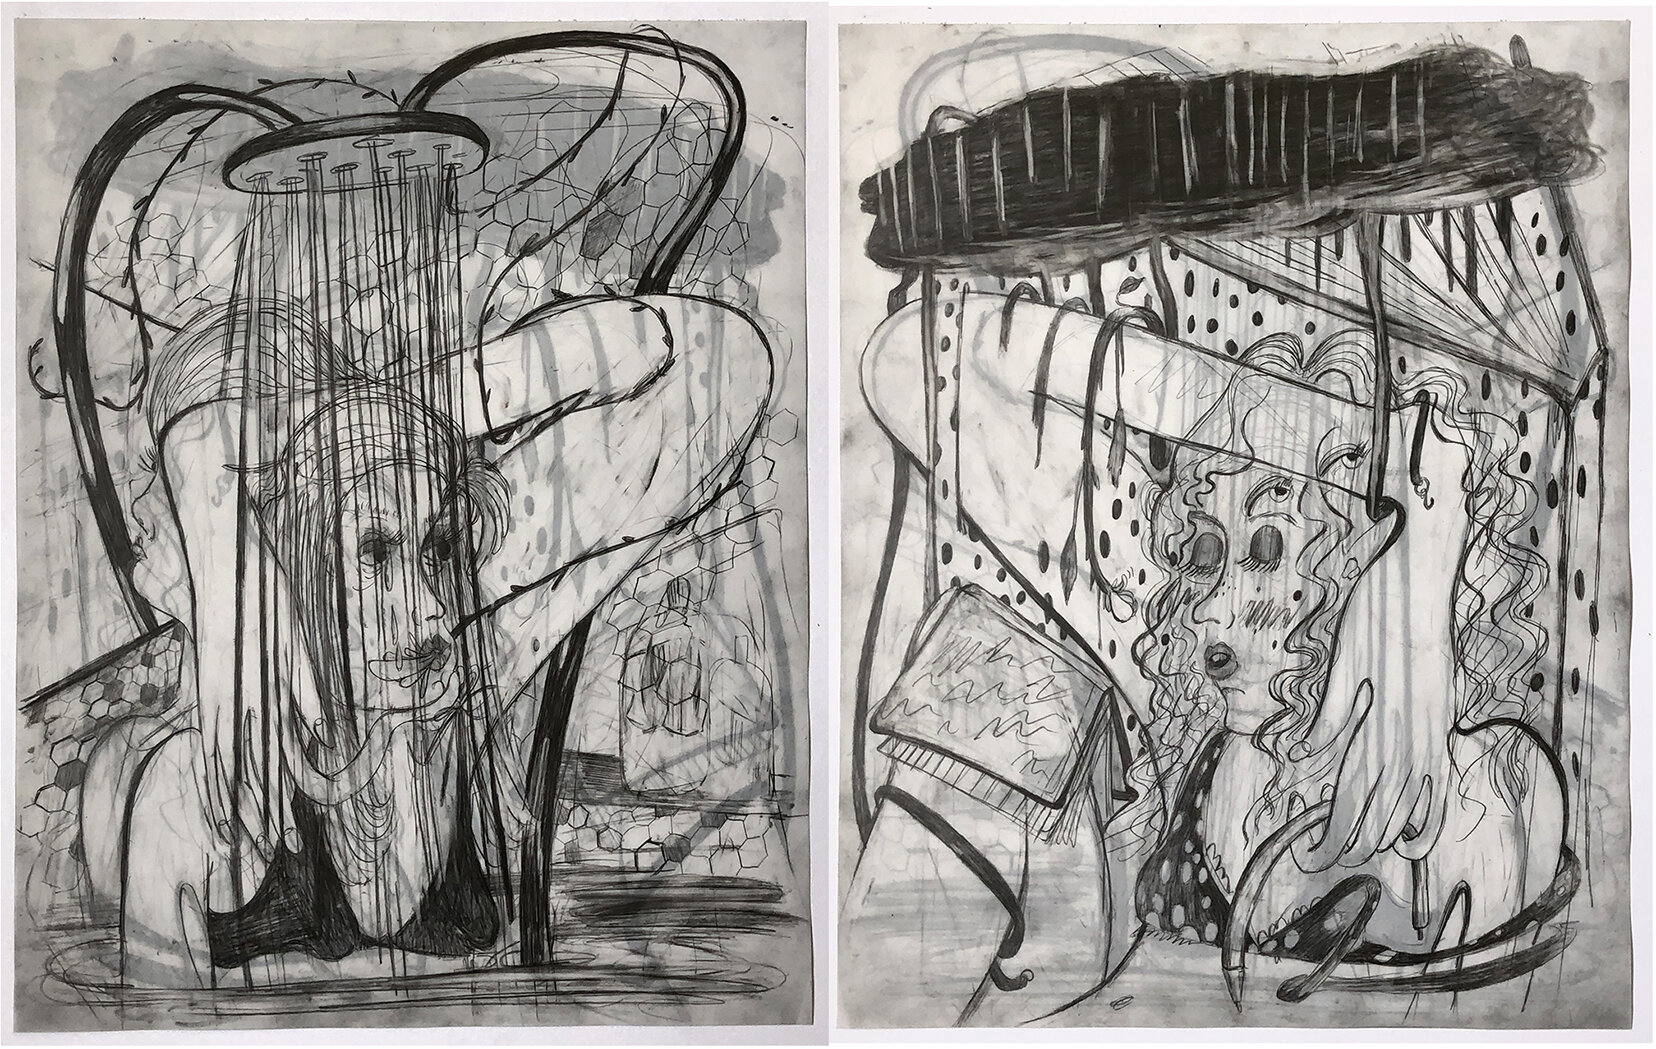   Big Drip / Planted Weather,  2020 ,  graphite on translucent Yupo paper (front-and-back drawings), 11 x 14 inches 